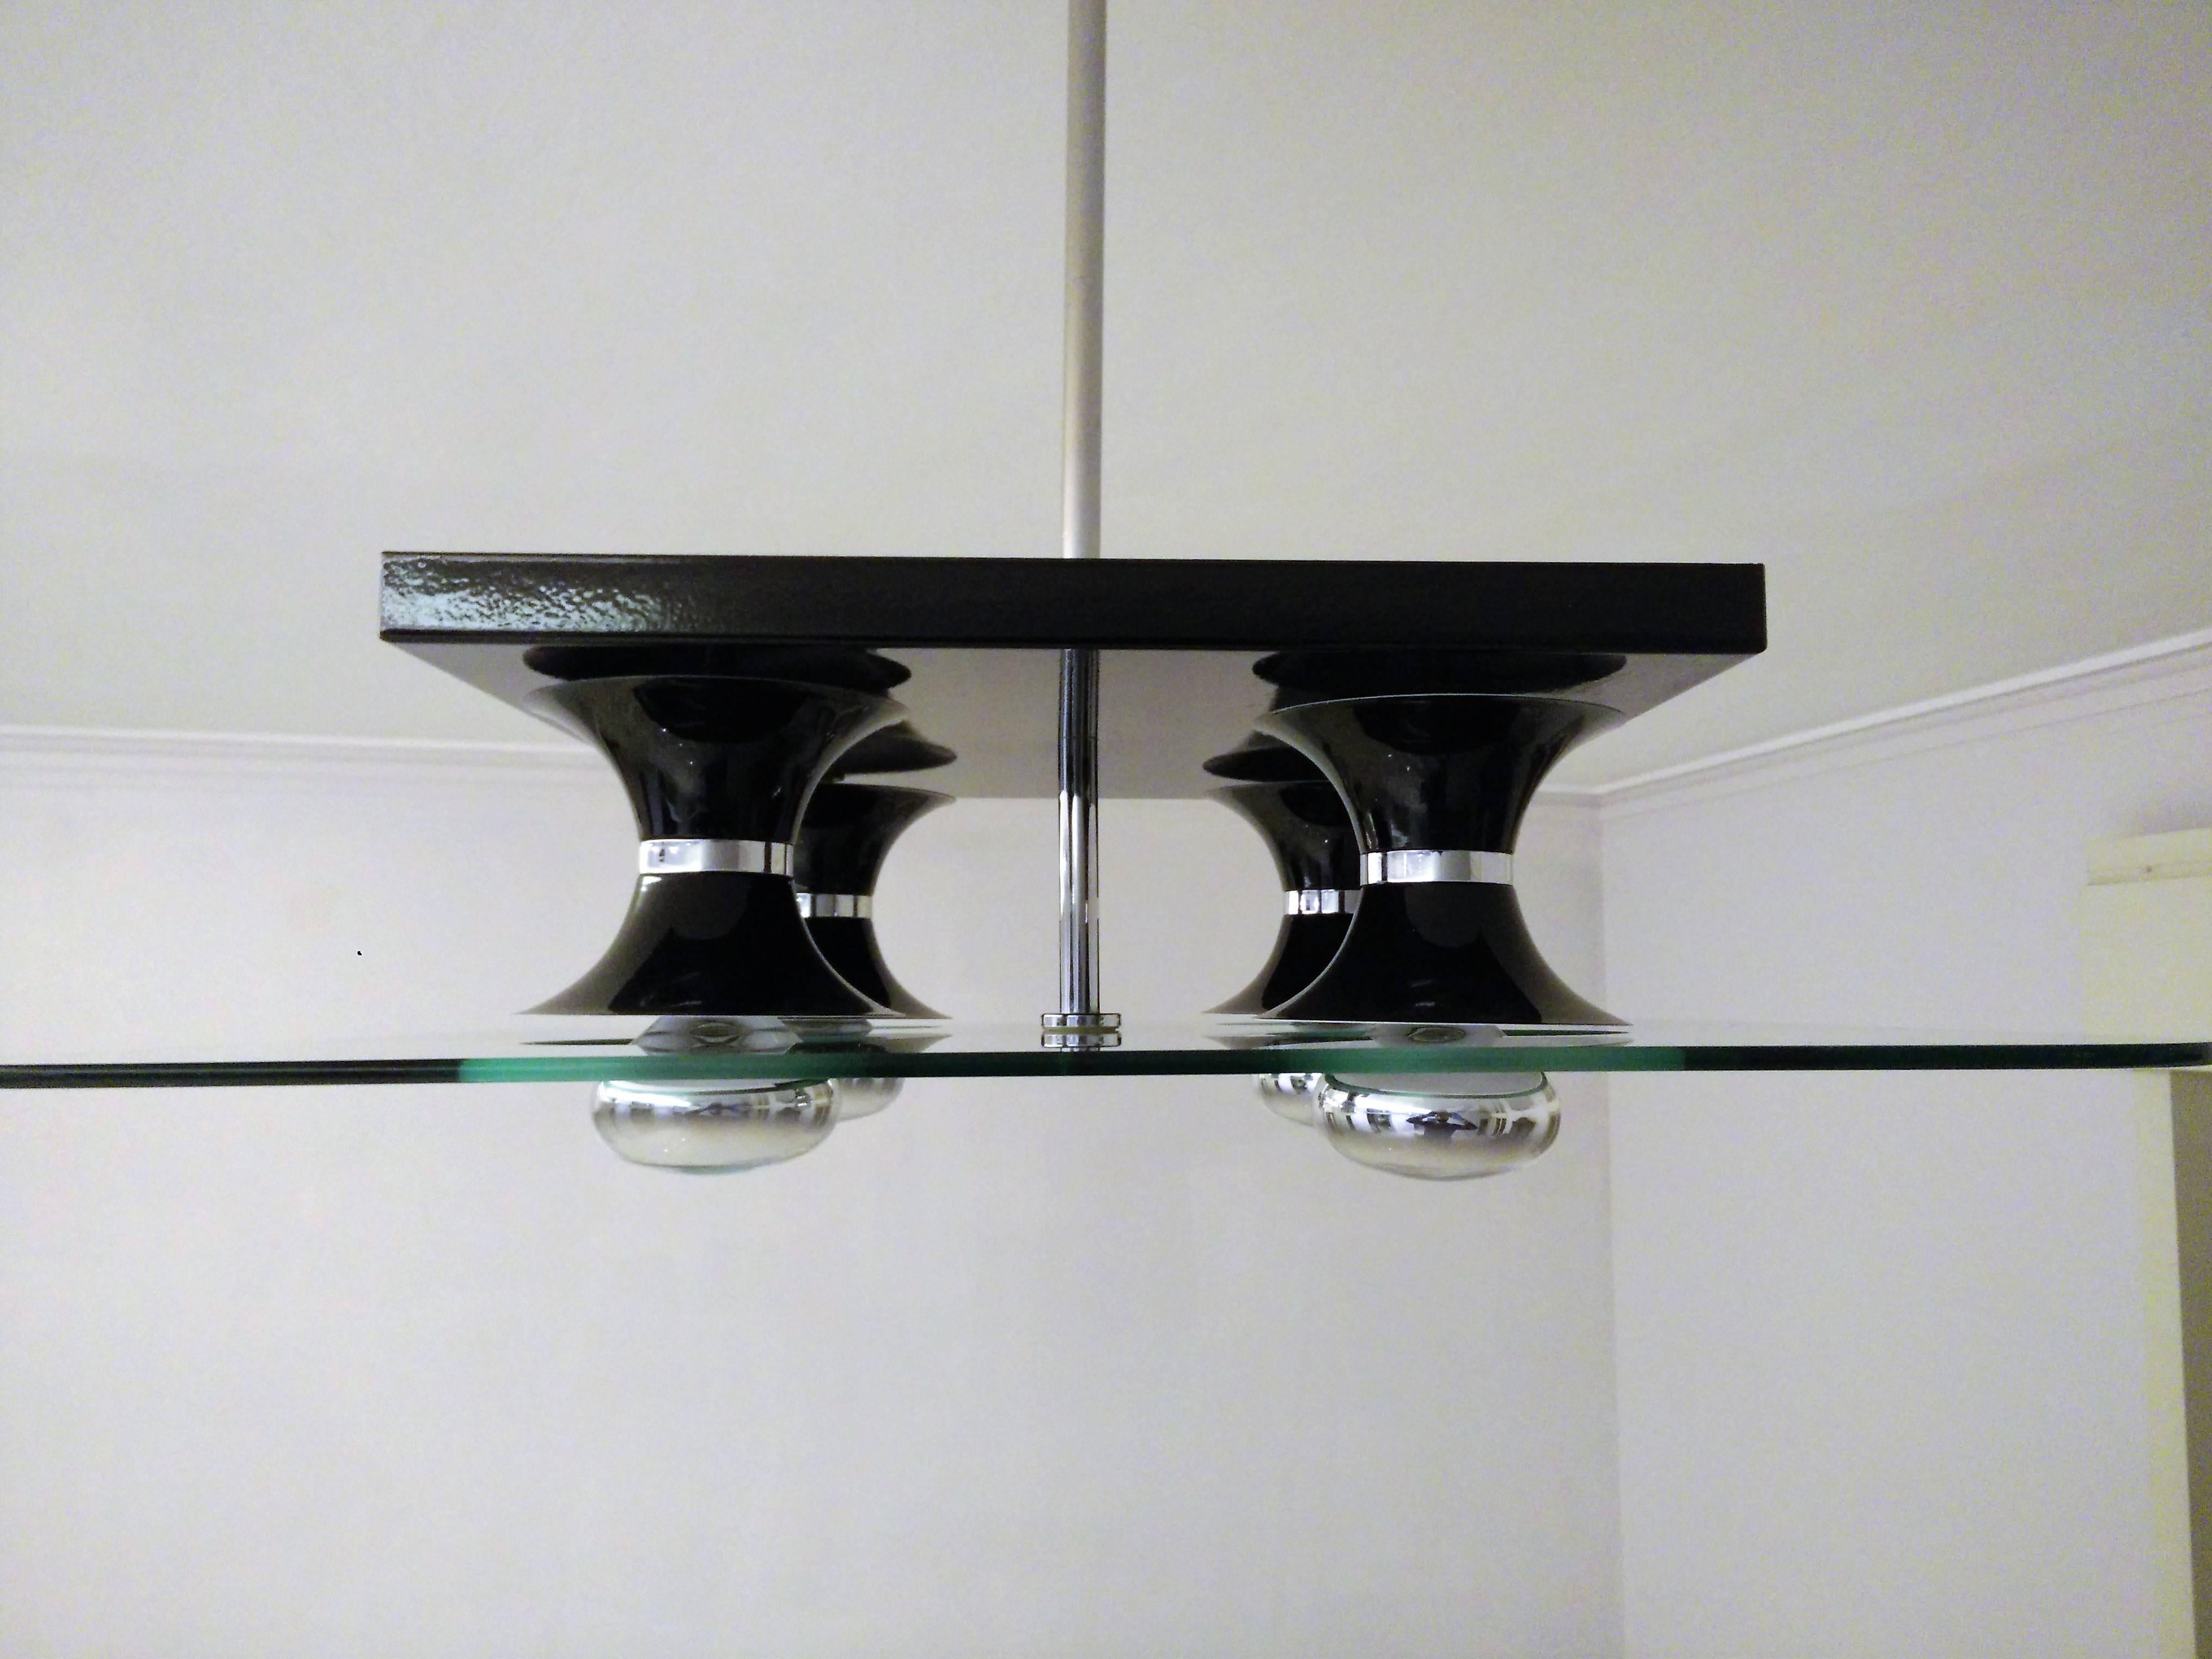 Mid-Century Modern Italian four-light chandelier, attributed to Stilnovo, in black lacquered metal and glass, circa 1970
Great condition throughout.
Measurements:
Glass 60 cm x 60 cm
Chandelier’s body, 40 cm long by 40 cm wide and 15 cm deep,
total